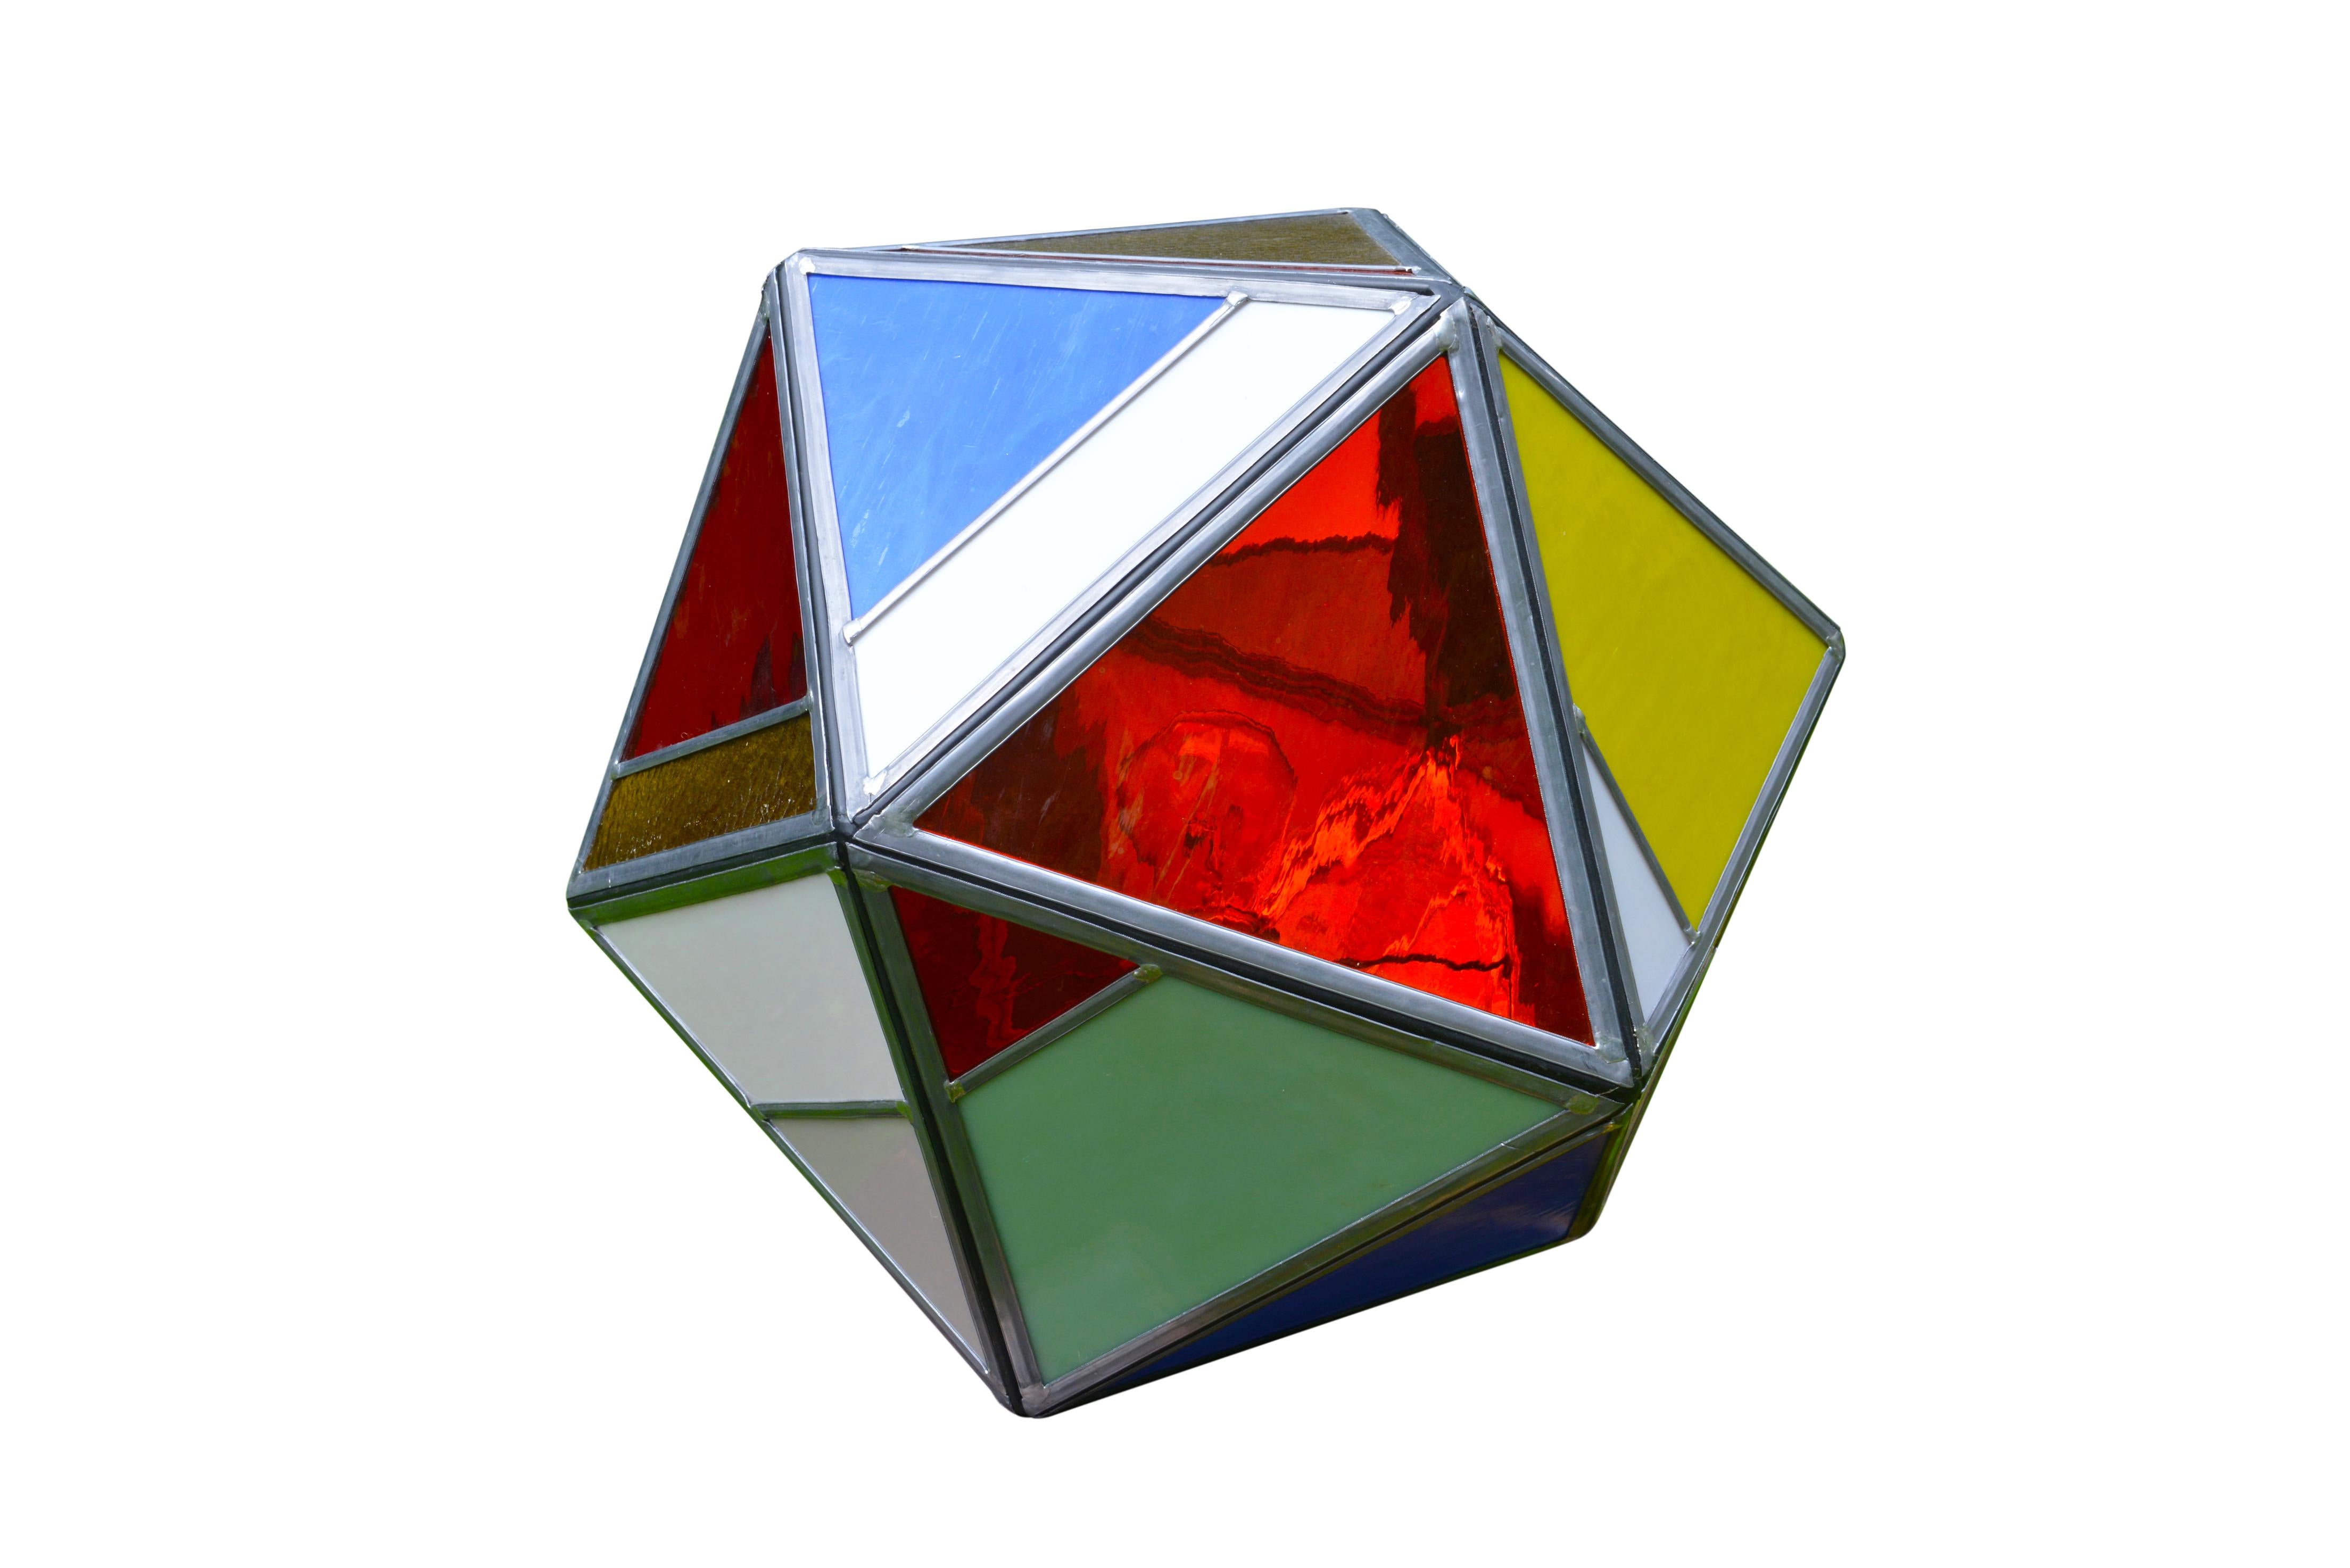 These funky disco-is table lamps were made in Bruges by two local artists, a metal and a glass artisan. This one is of polyhedral shape and has different colors and types of lead glass inserts.